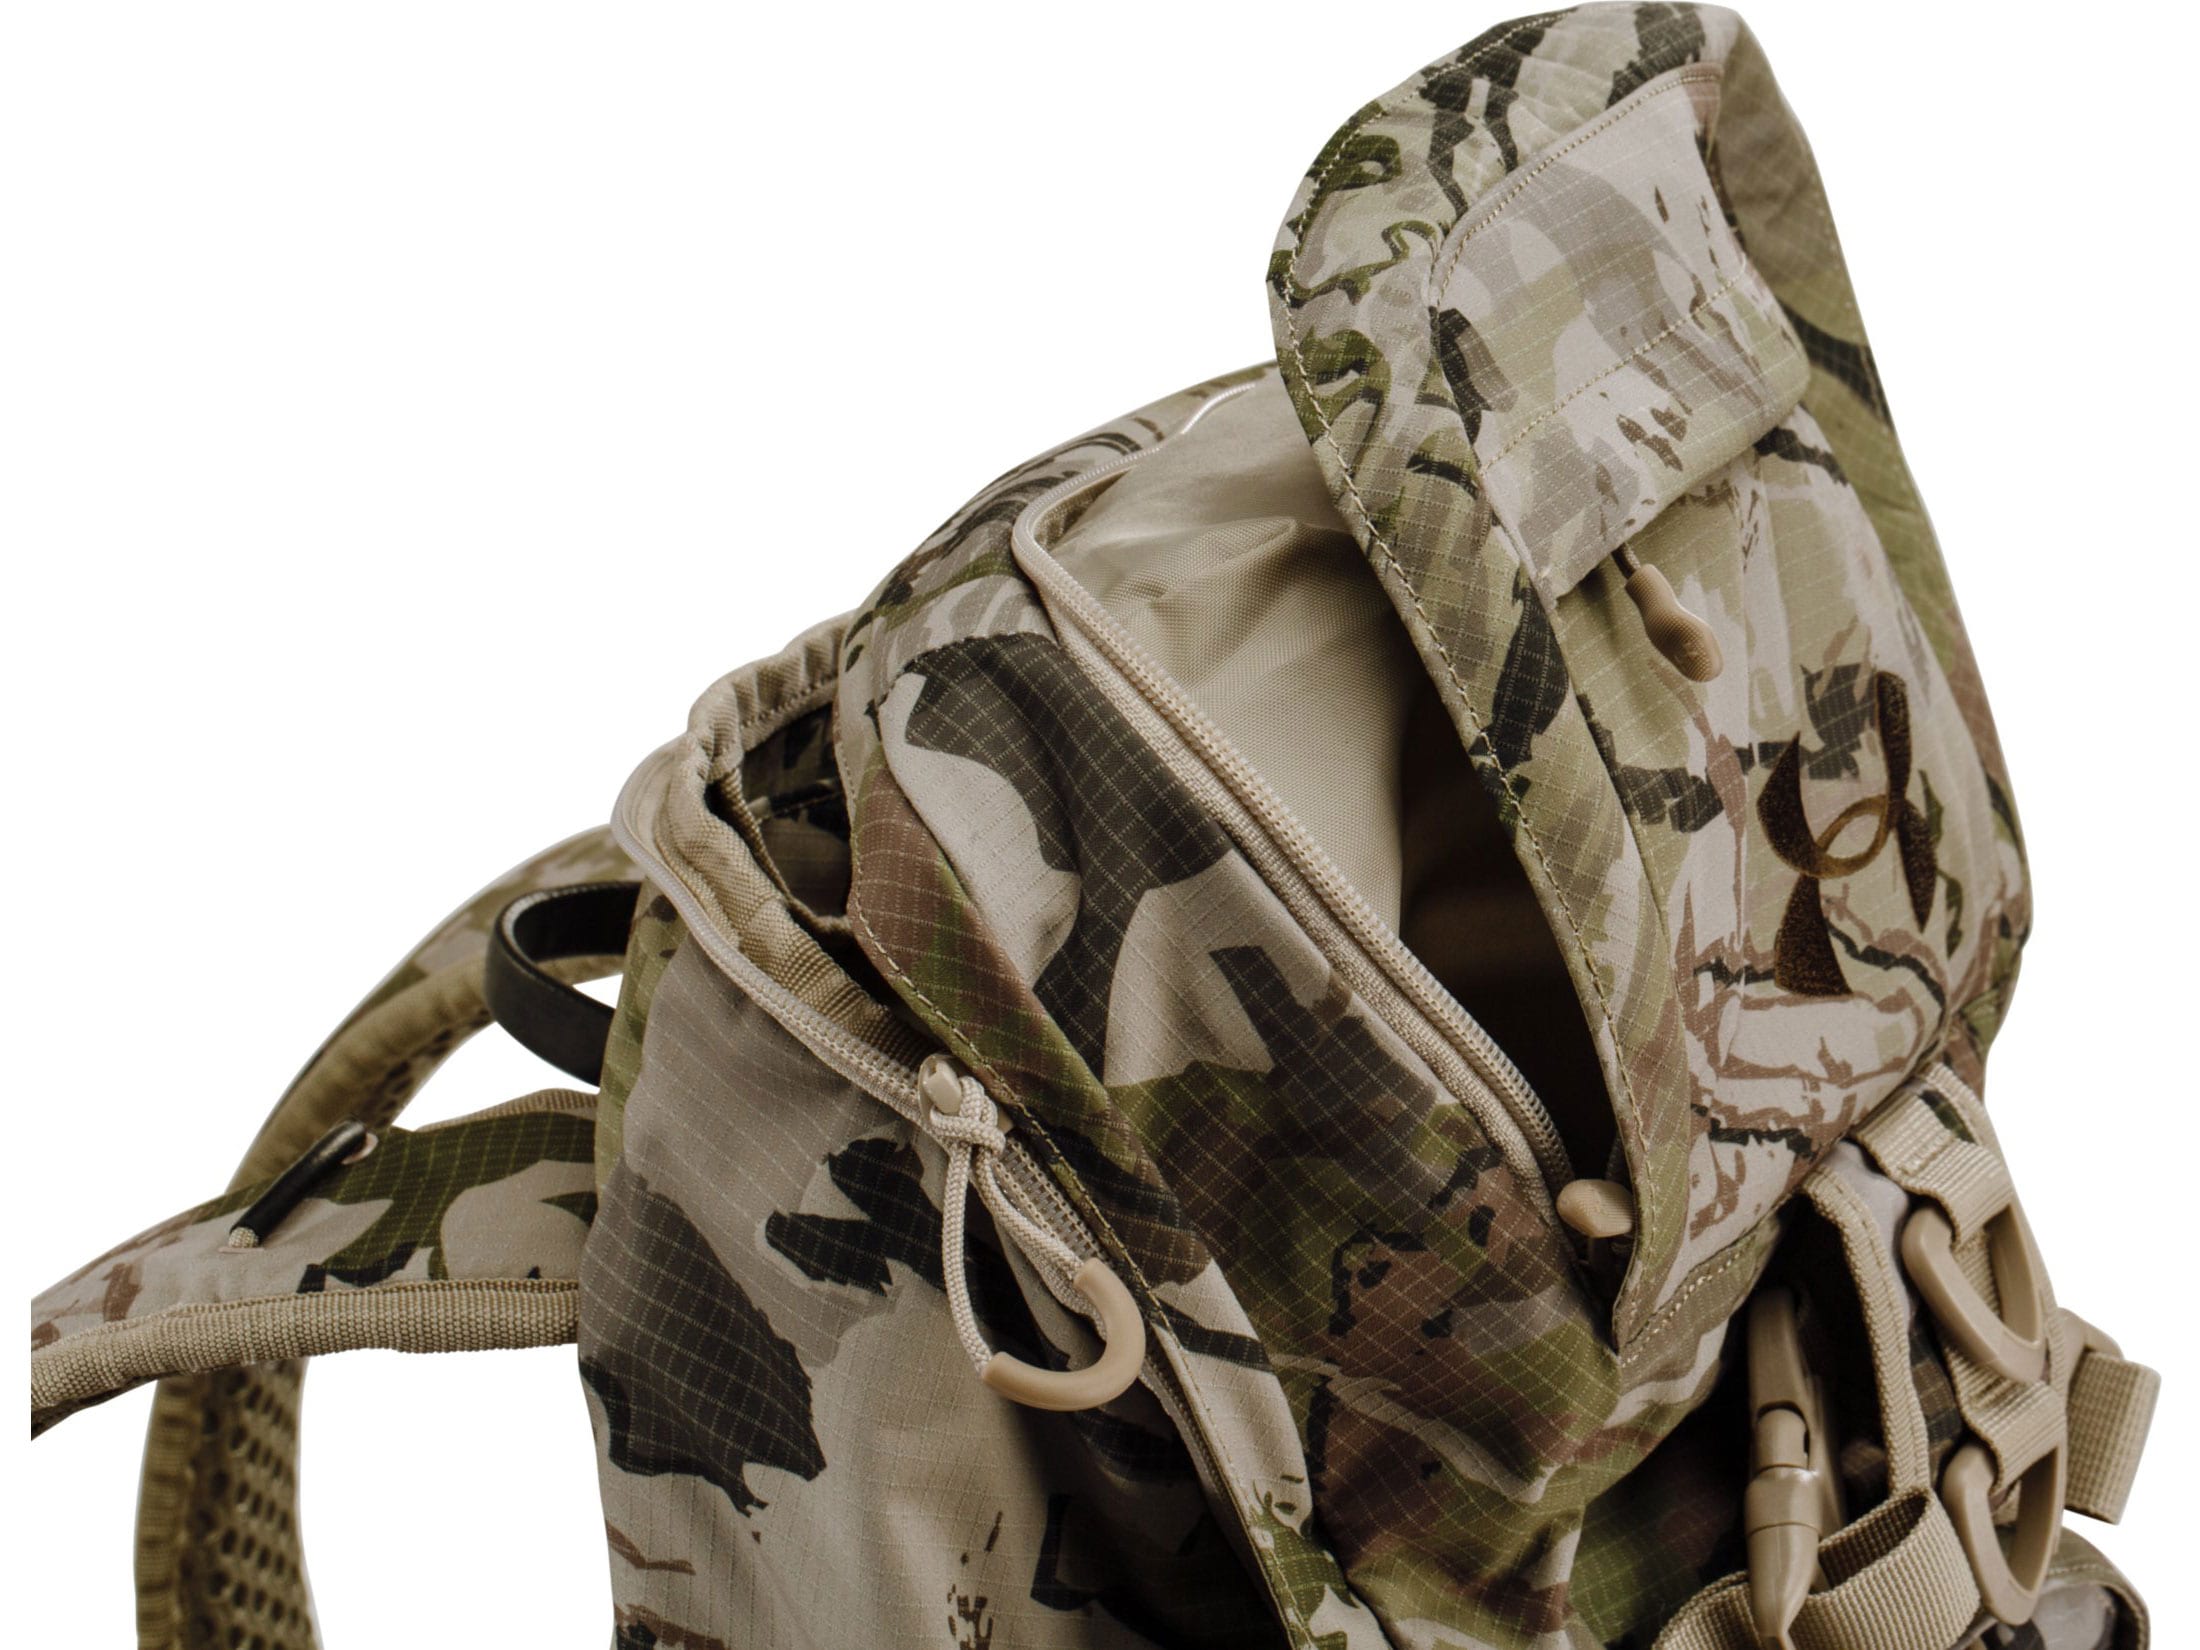 under armour hunting pack